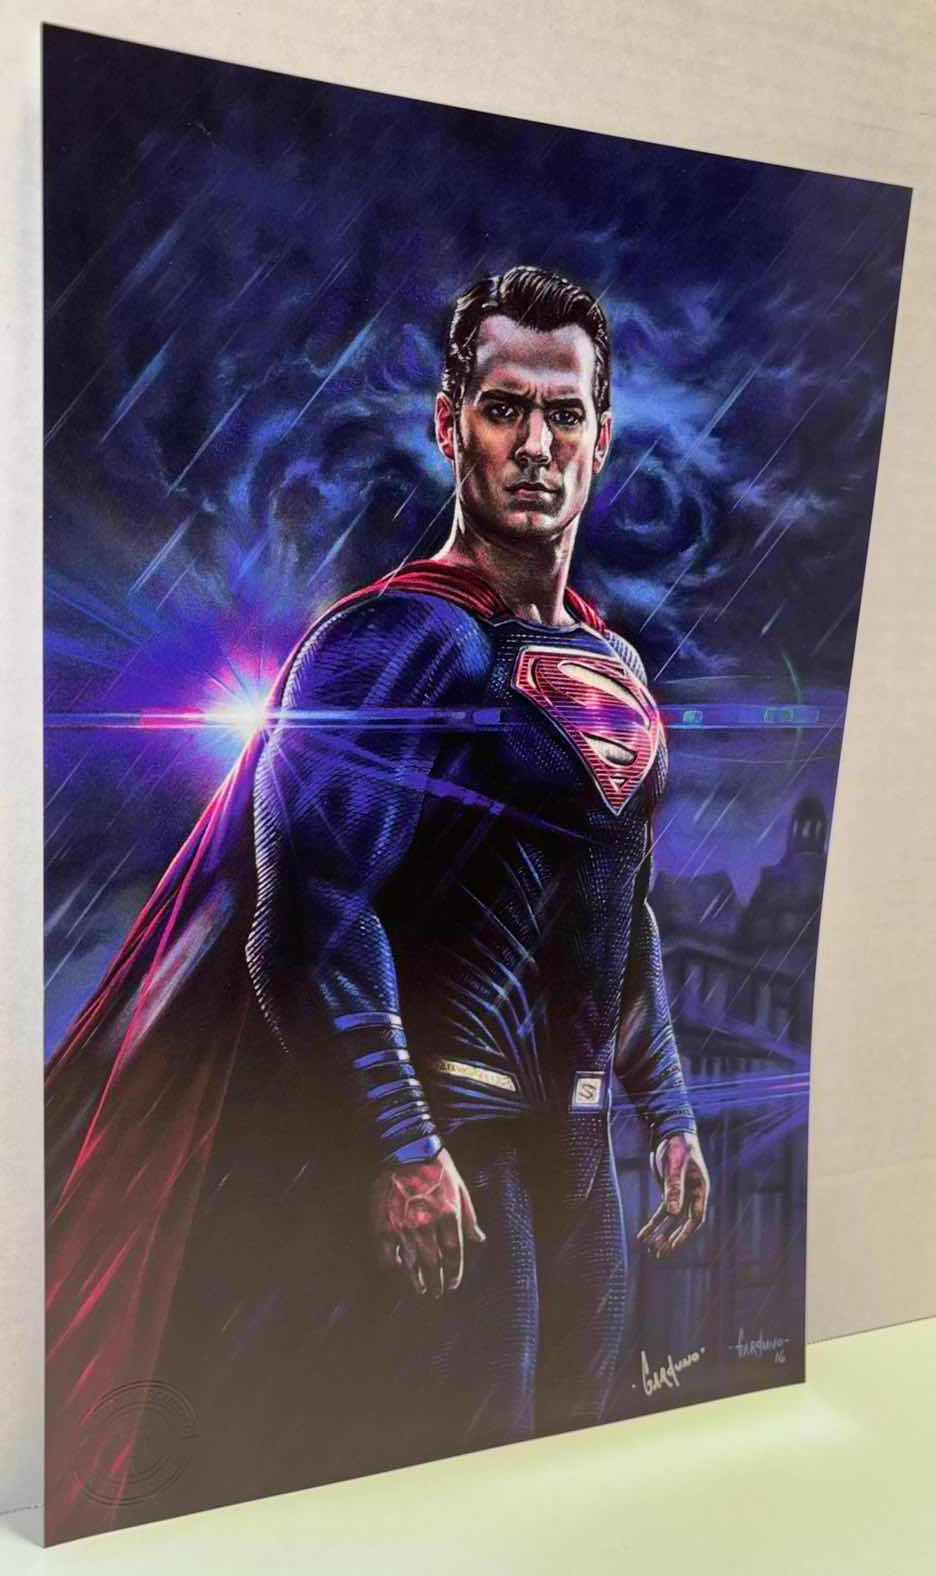 Photo 1 of VICTOR GARDUNO “MAN OF STEEL” 11” X 17” INFINITY GLOSS UNFRAMED PRINT W EMBOSSED SEAL, DIGITAL SIGNATURE & OFFICIAL SIGNATURE W COA INCLUDED, STORED IN A RIGID PRINT PROTECTOR SLEEVE